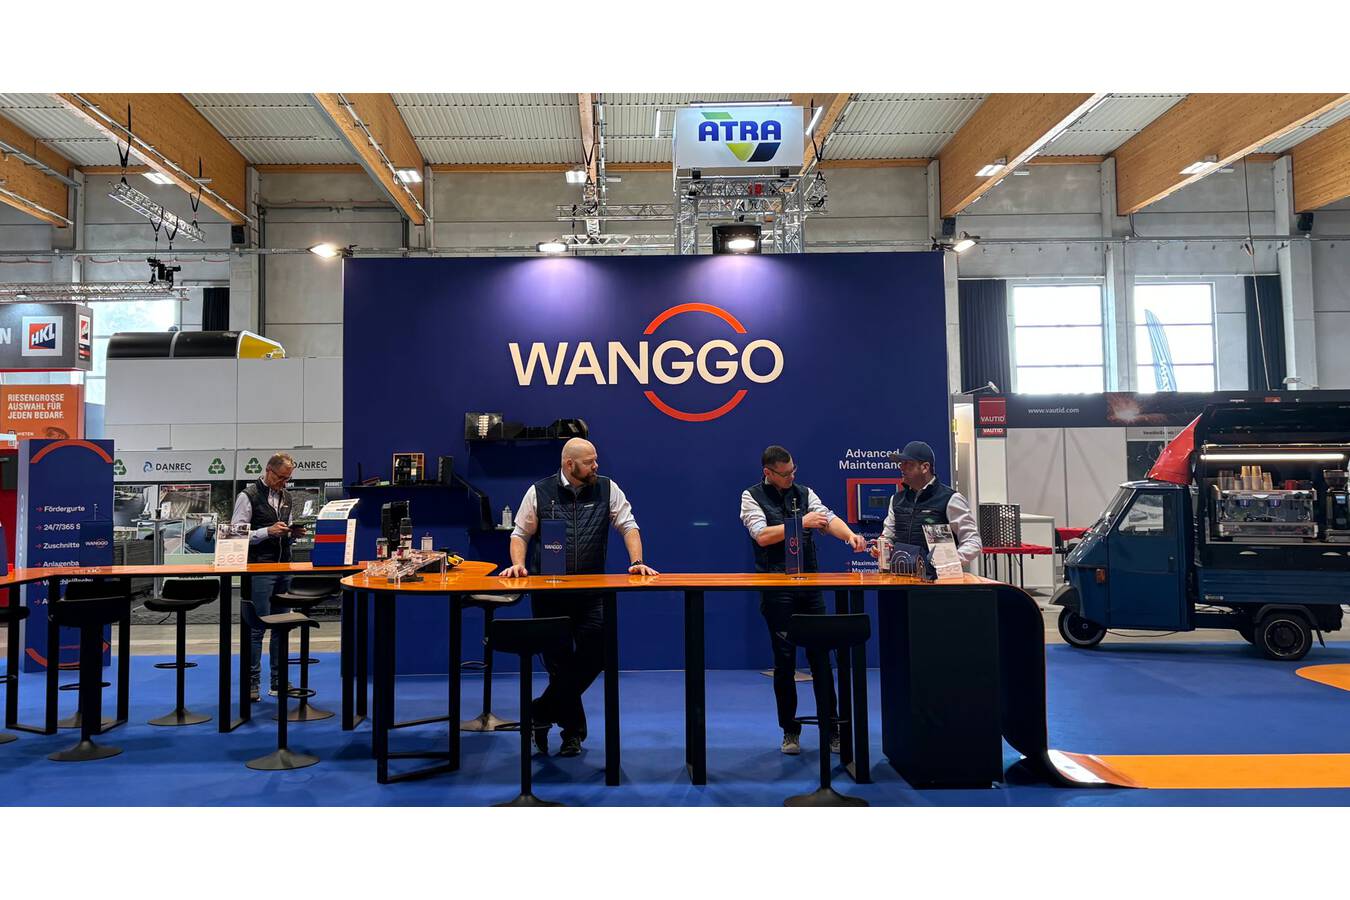 ScrapeTec & Wanggo Gummitechnik at the MAWEV Show in St. Pölten High visitor numbers and great interest at the Wanggo Gummitechnik stand